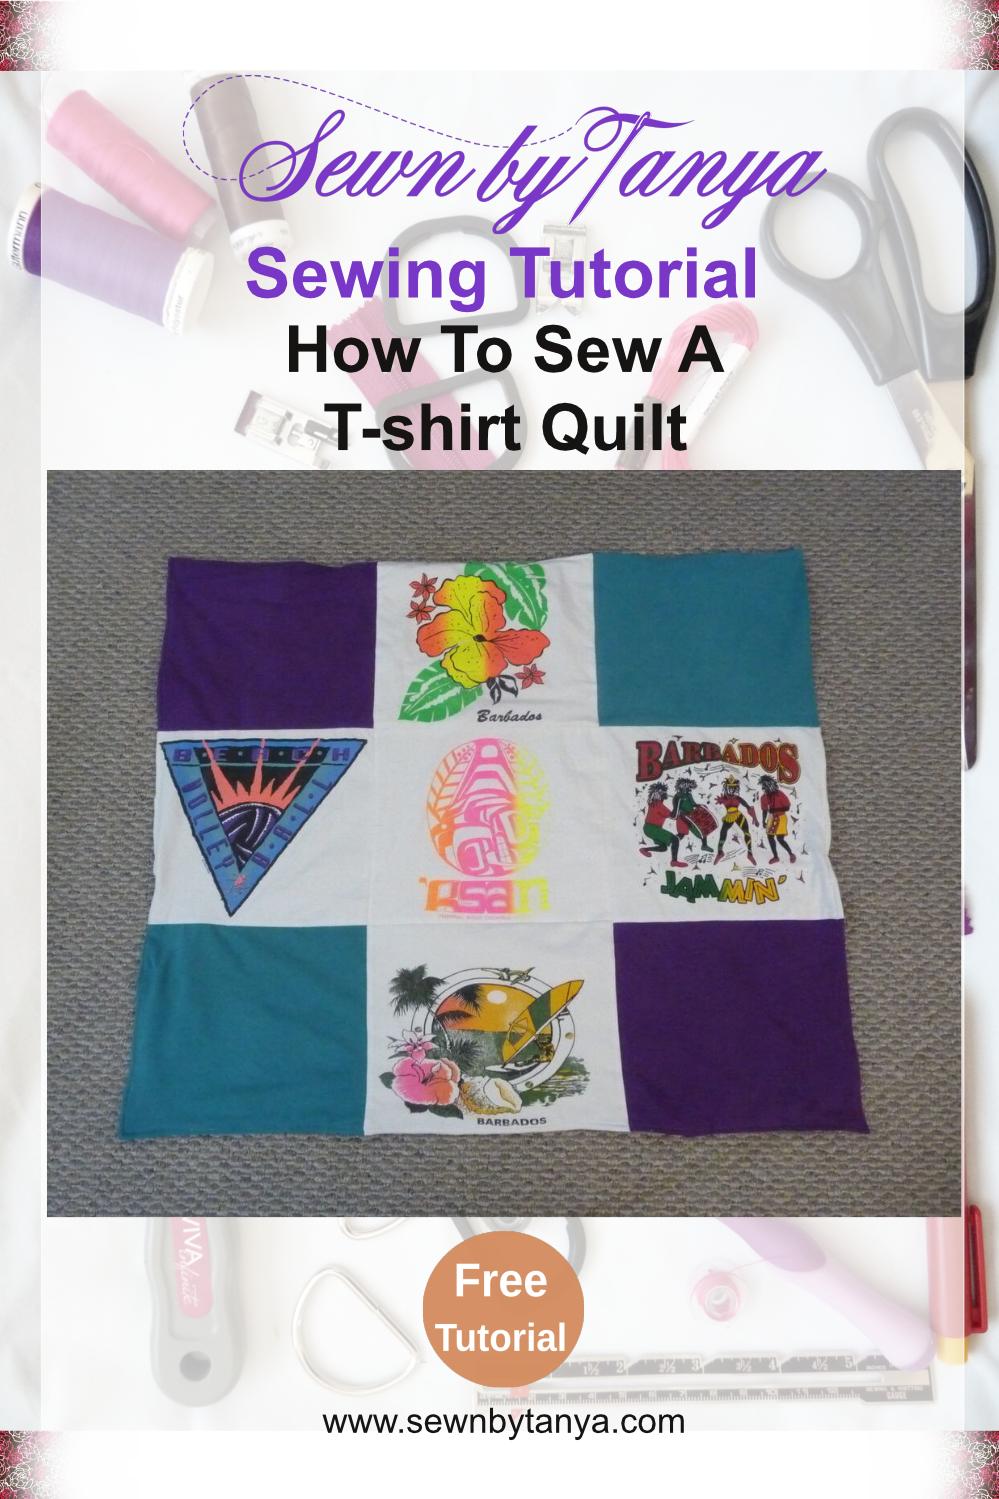 Sewn By Tanya Sewing Tutorial: How To Sew A T-shirt Quilt